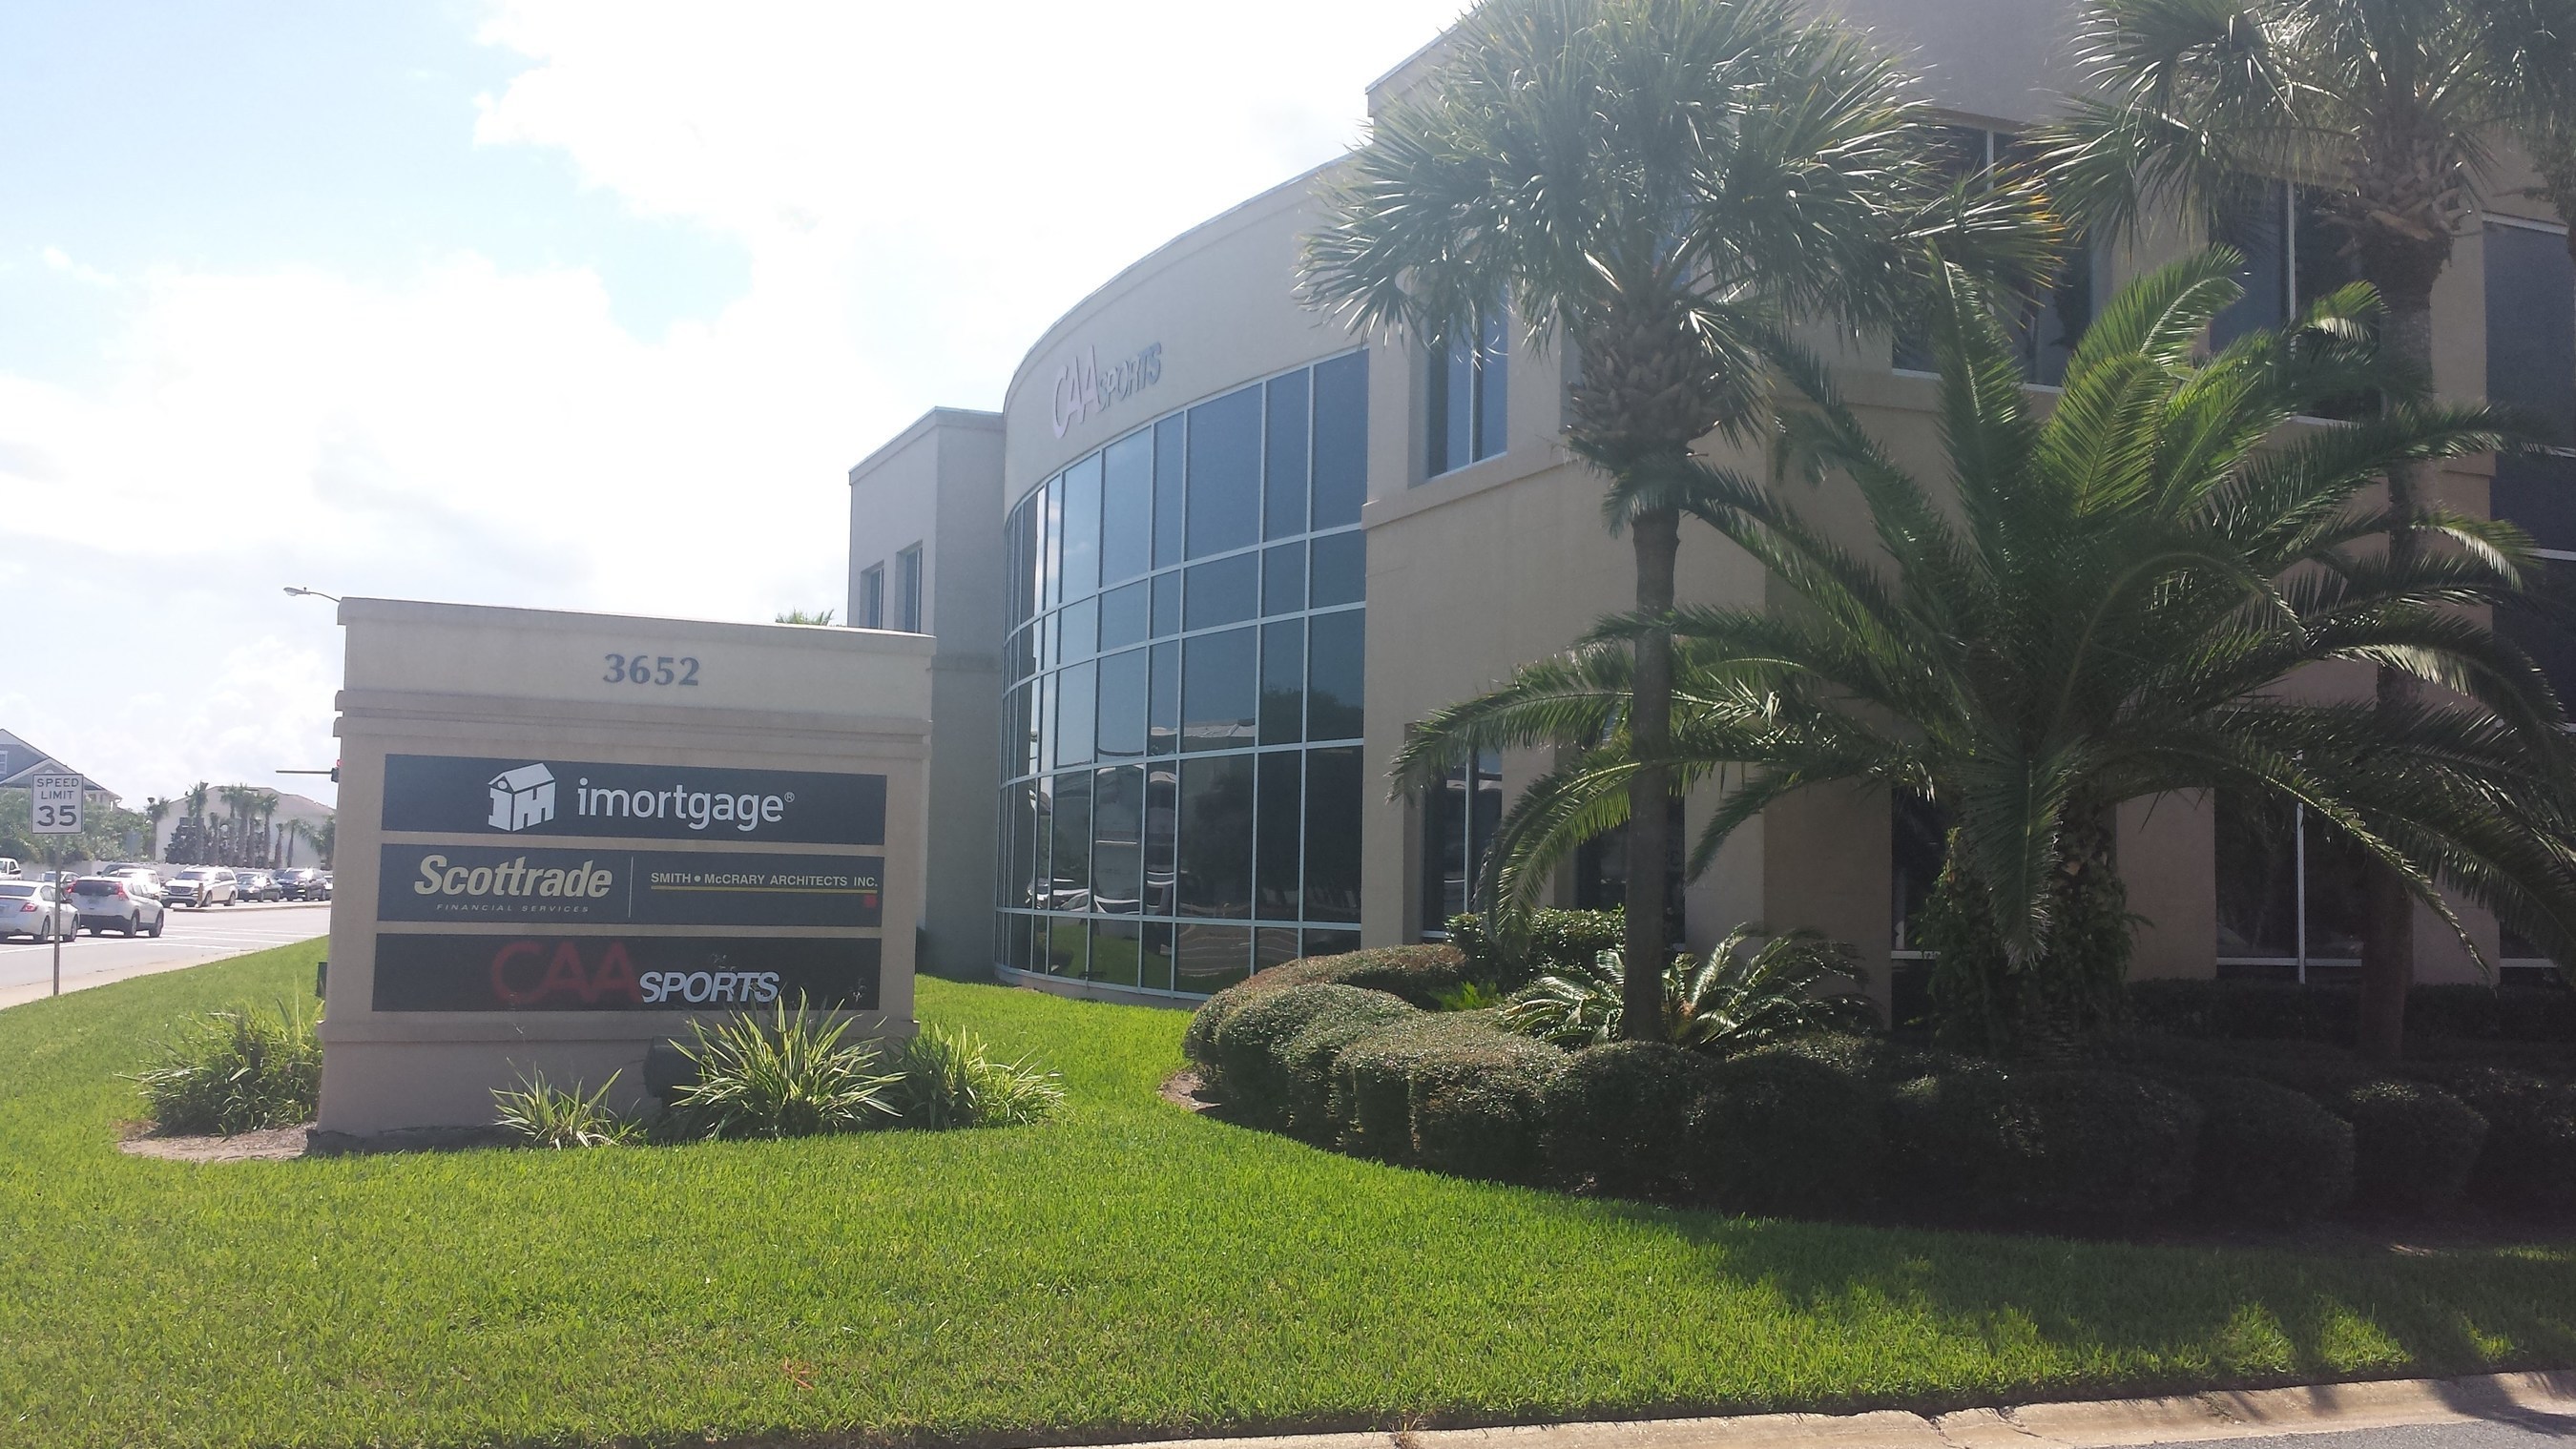 New imortgage branch location in Jacksonville, FL